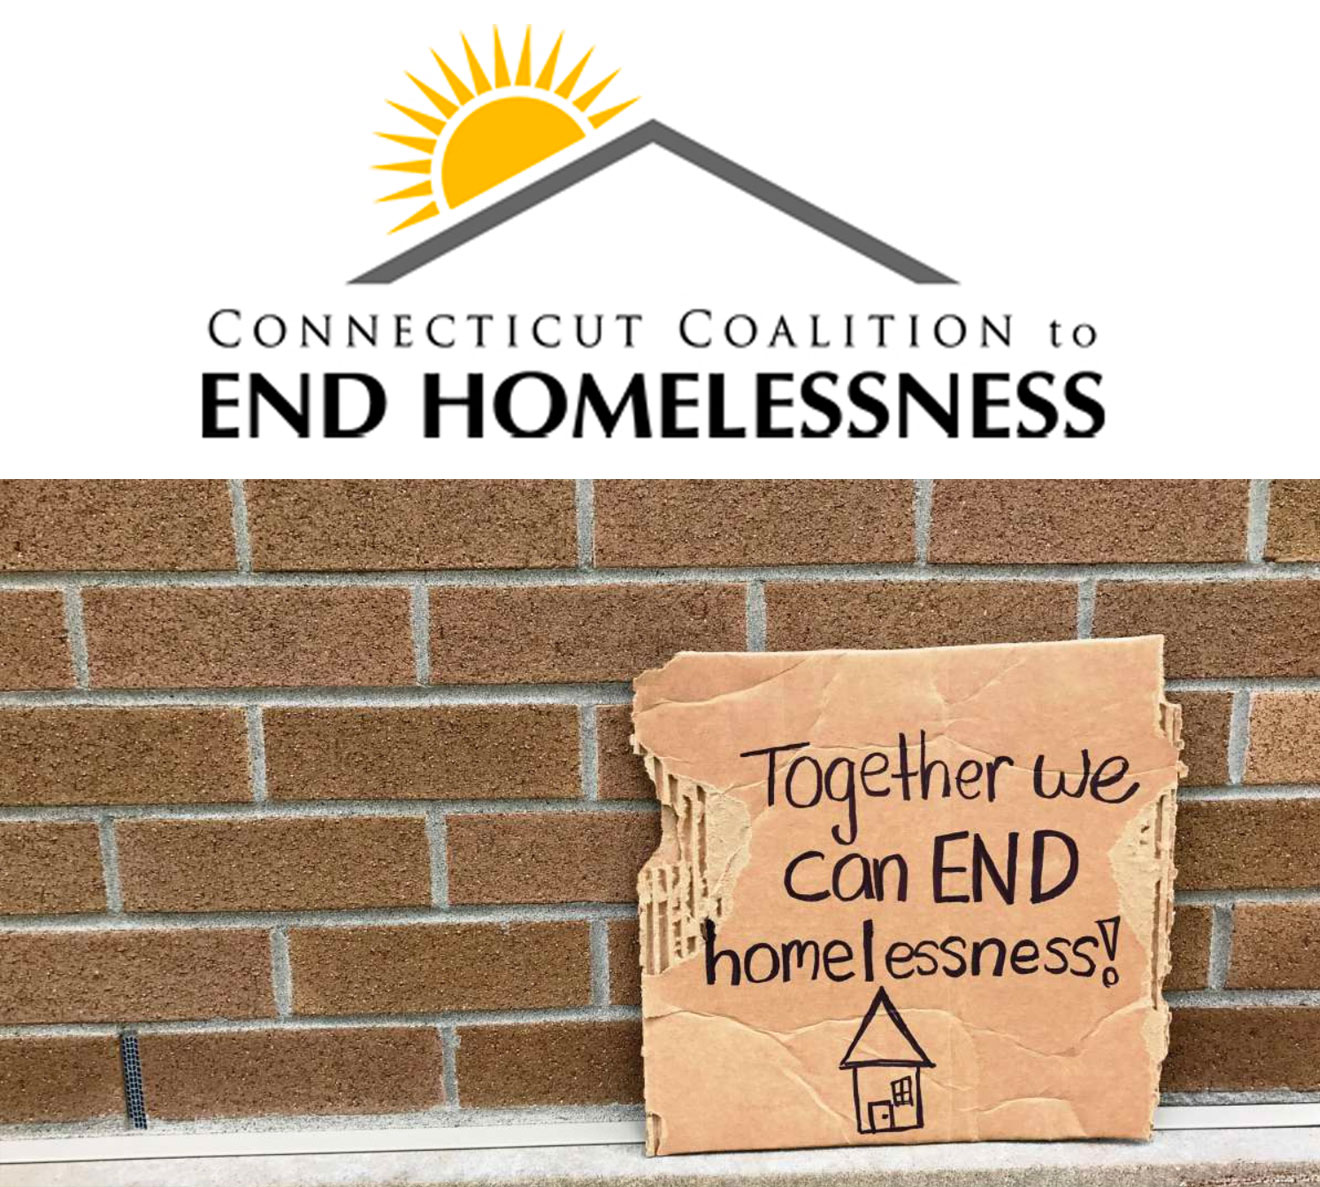 CT Coalition to End Homelessness